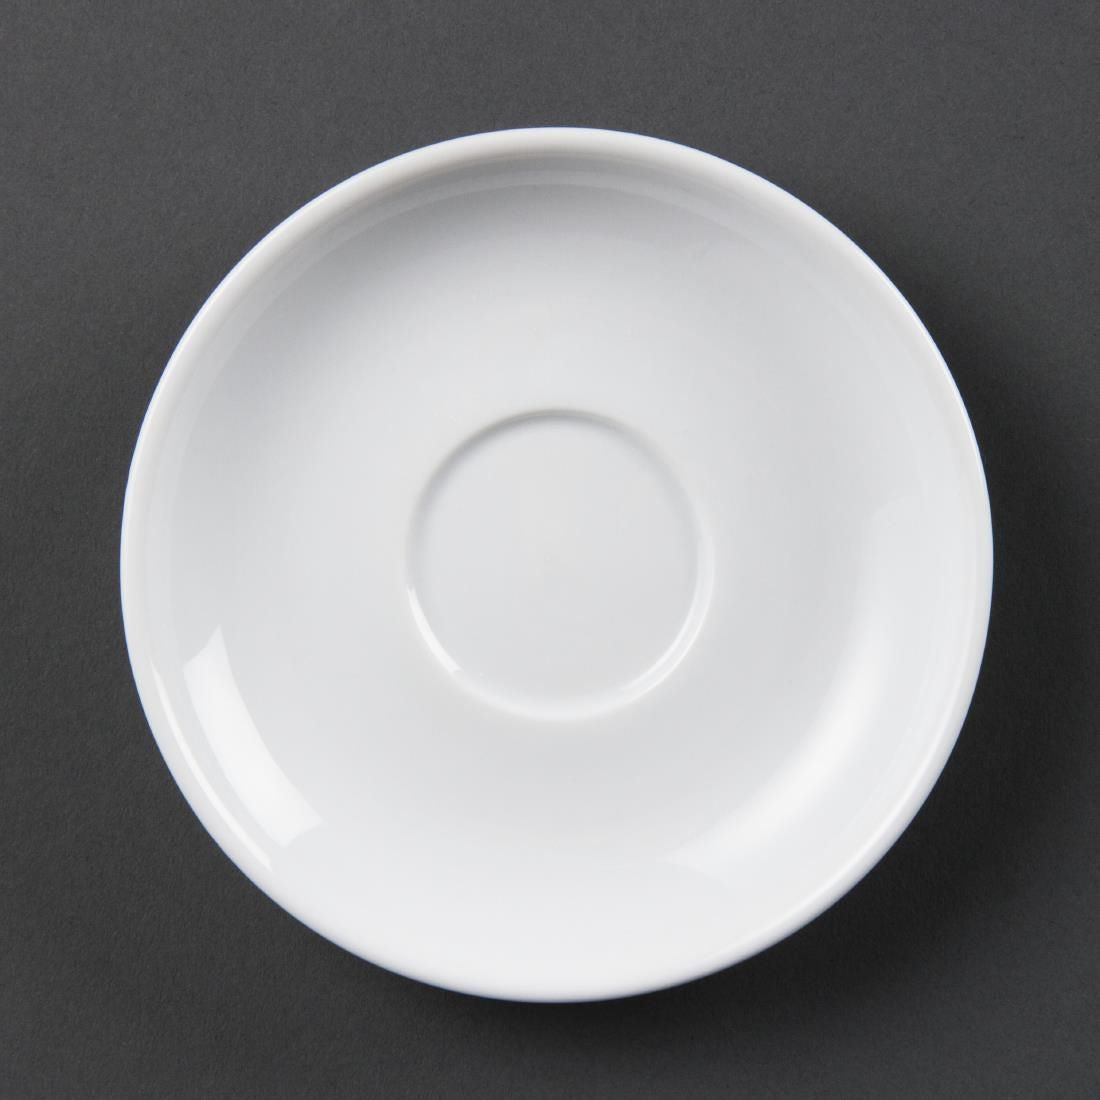 CB465 Olympia Whiteware Espresso Saucers (Pack of 12)